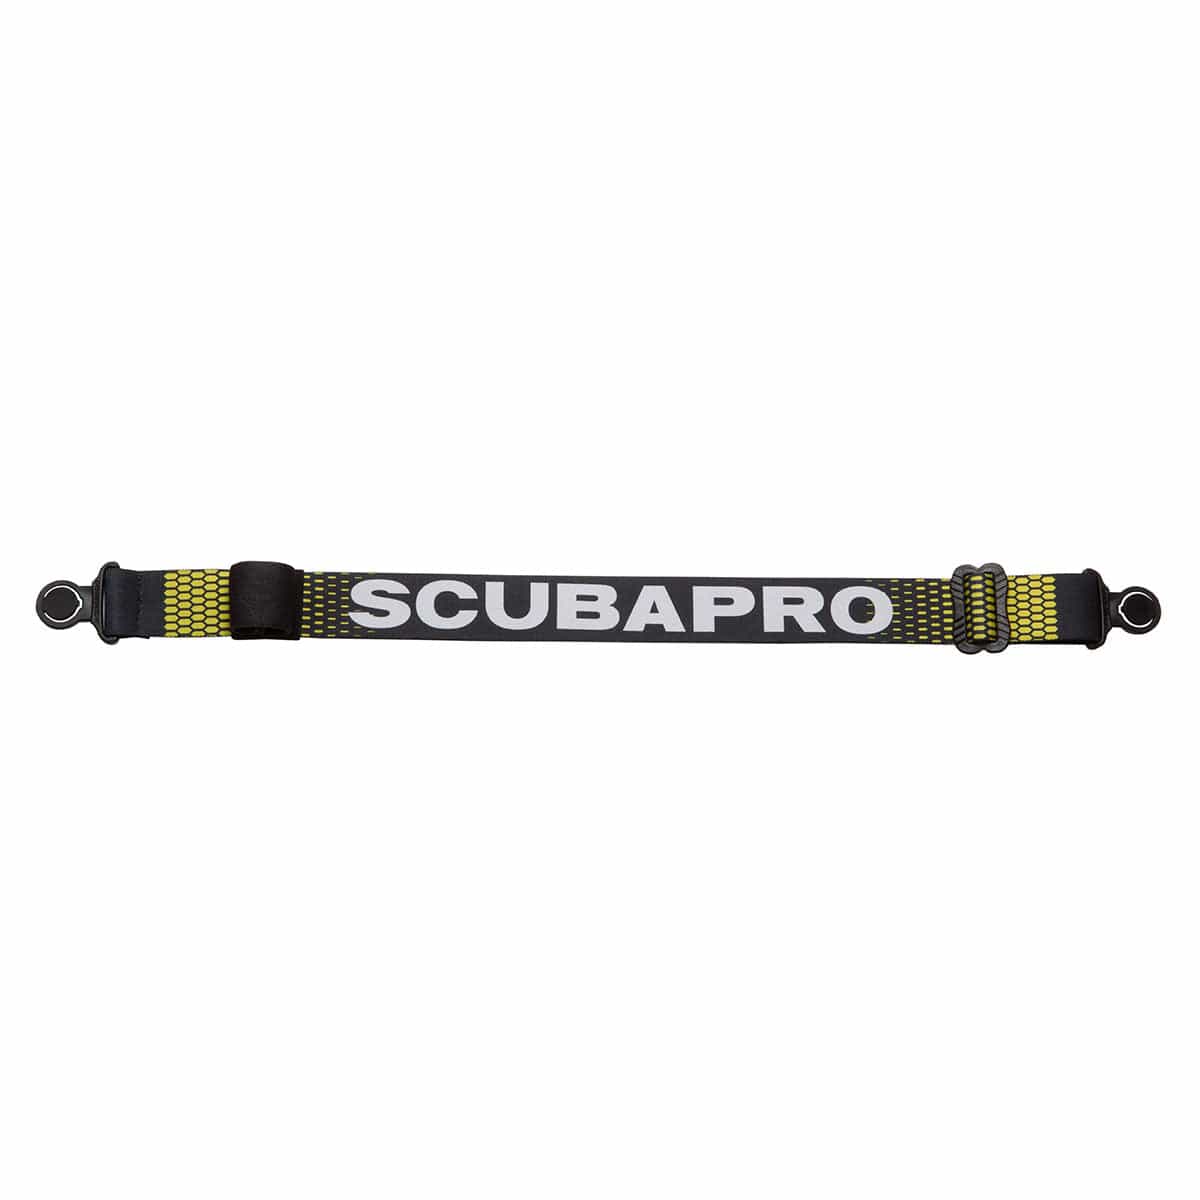 Scubapro Comfort Strap - Turquoise - 24.730.020-NED - 27